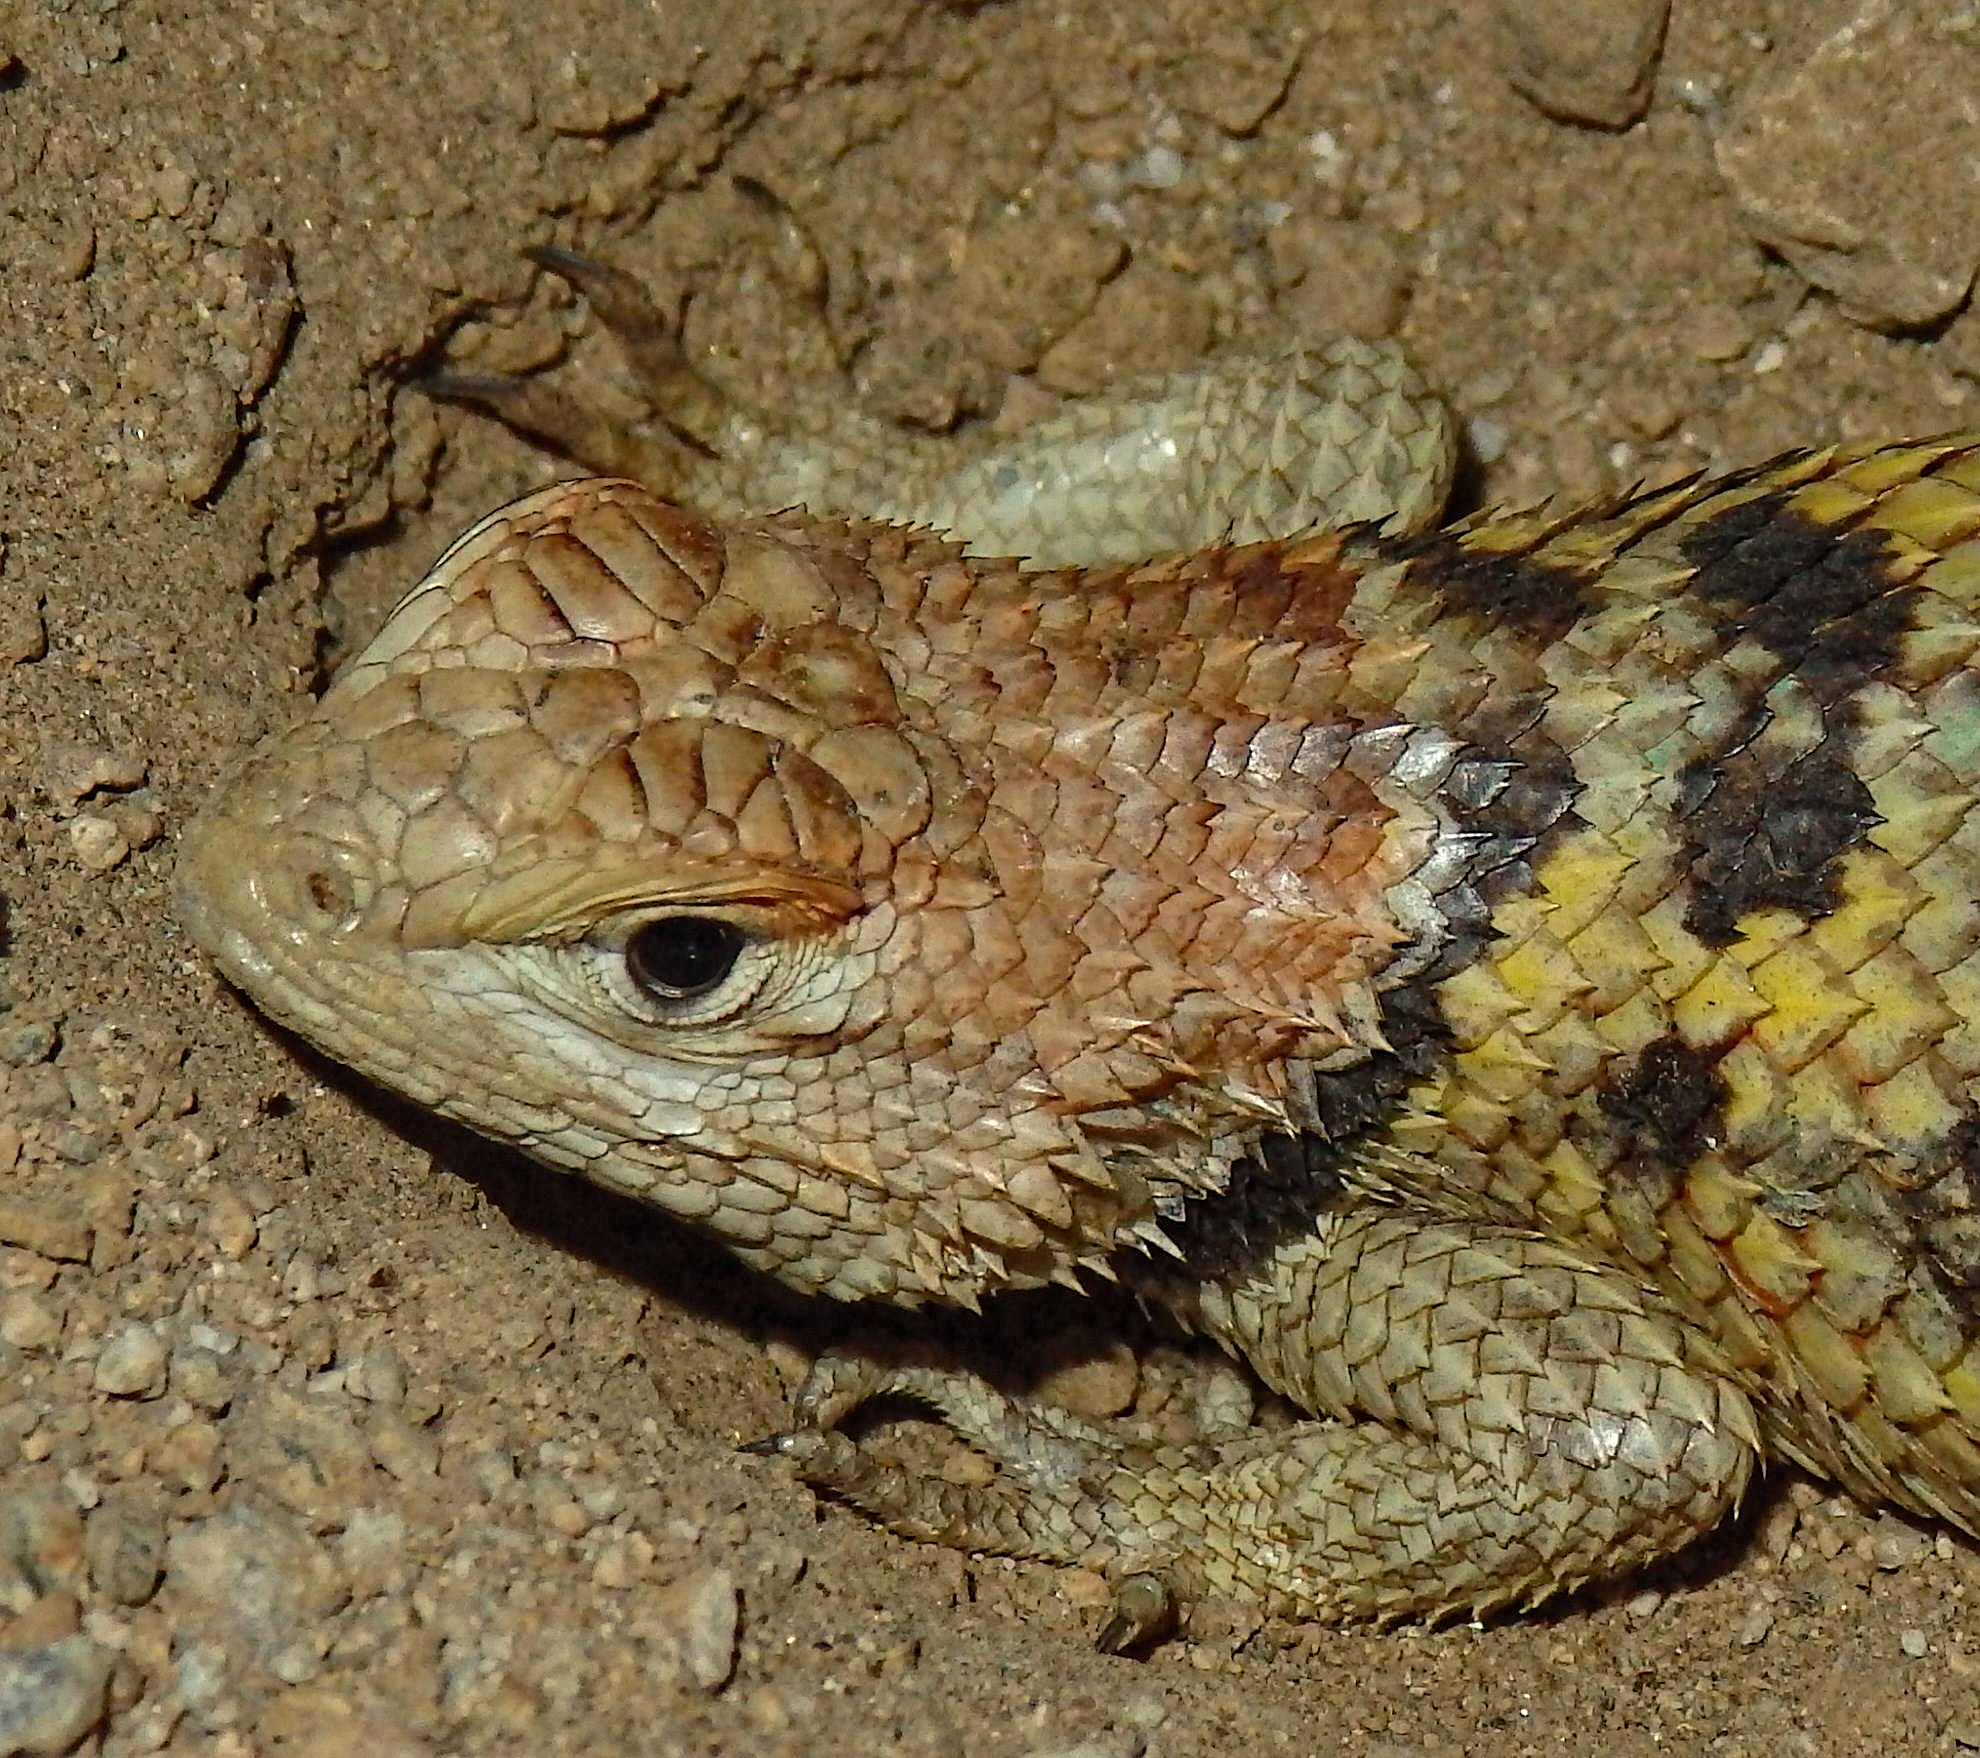 Listings of lizards found in the desert southwest with info and photos